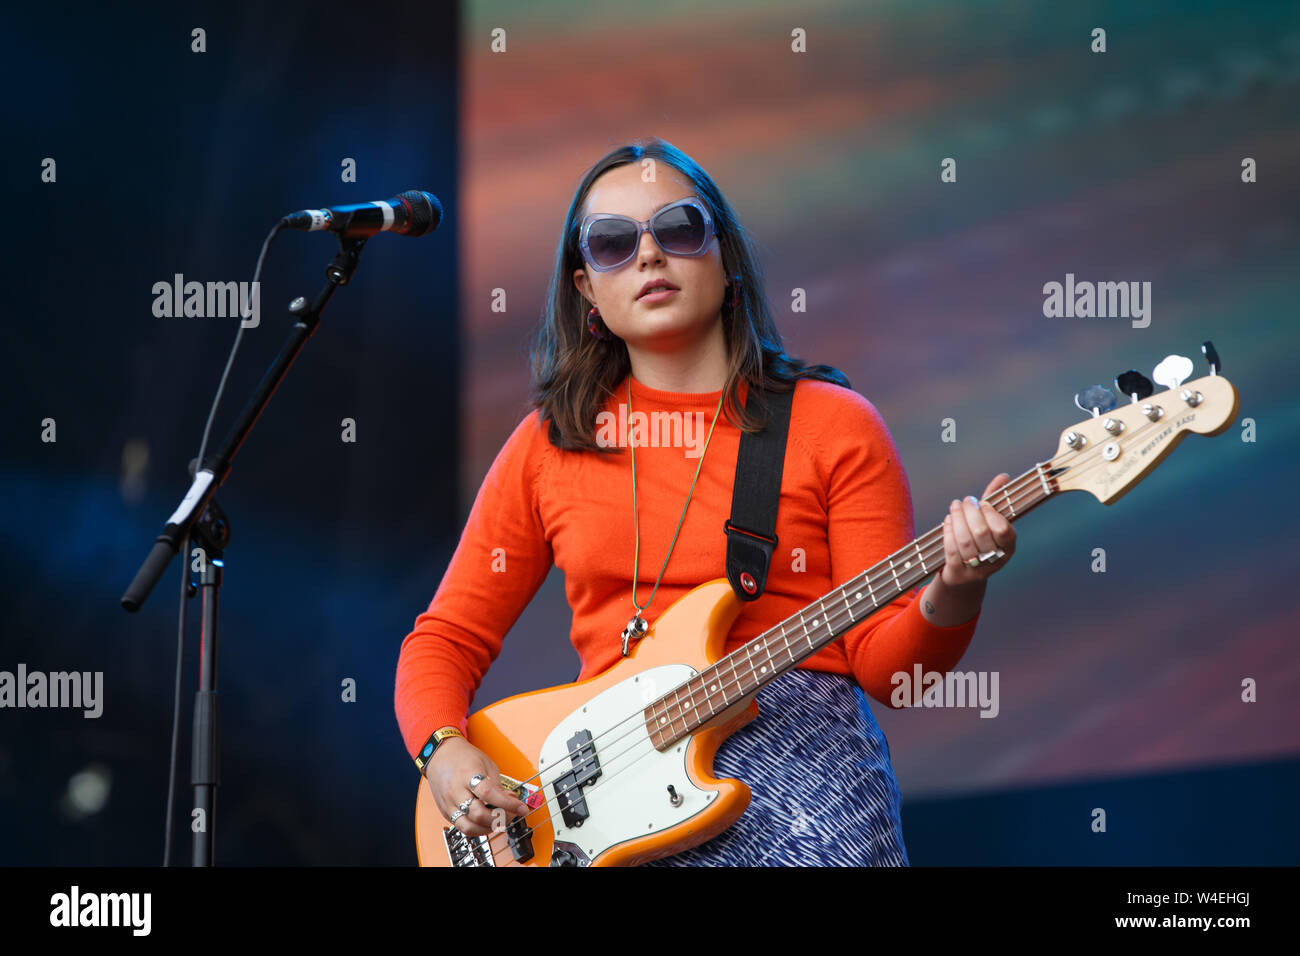 Jodrell Bank, Cheshire. 21st July, 2019. transmissions perform live on the Main Stage at Bluedot Festival 2019 held in the shadow of the Lovell Telescope. Stock Photo